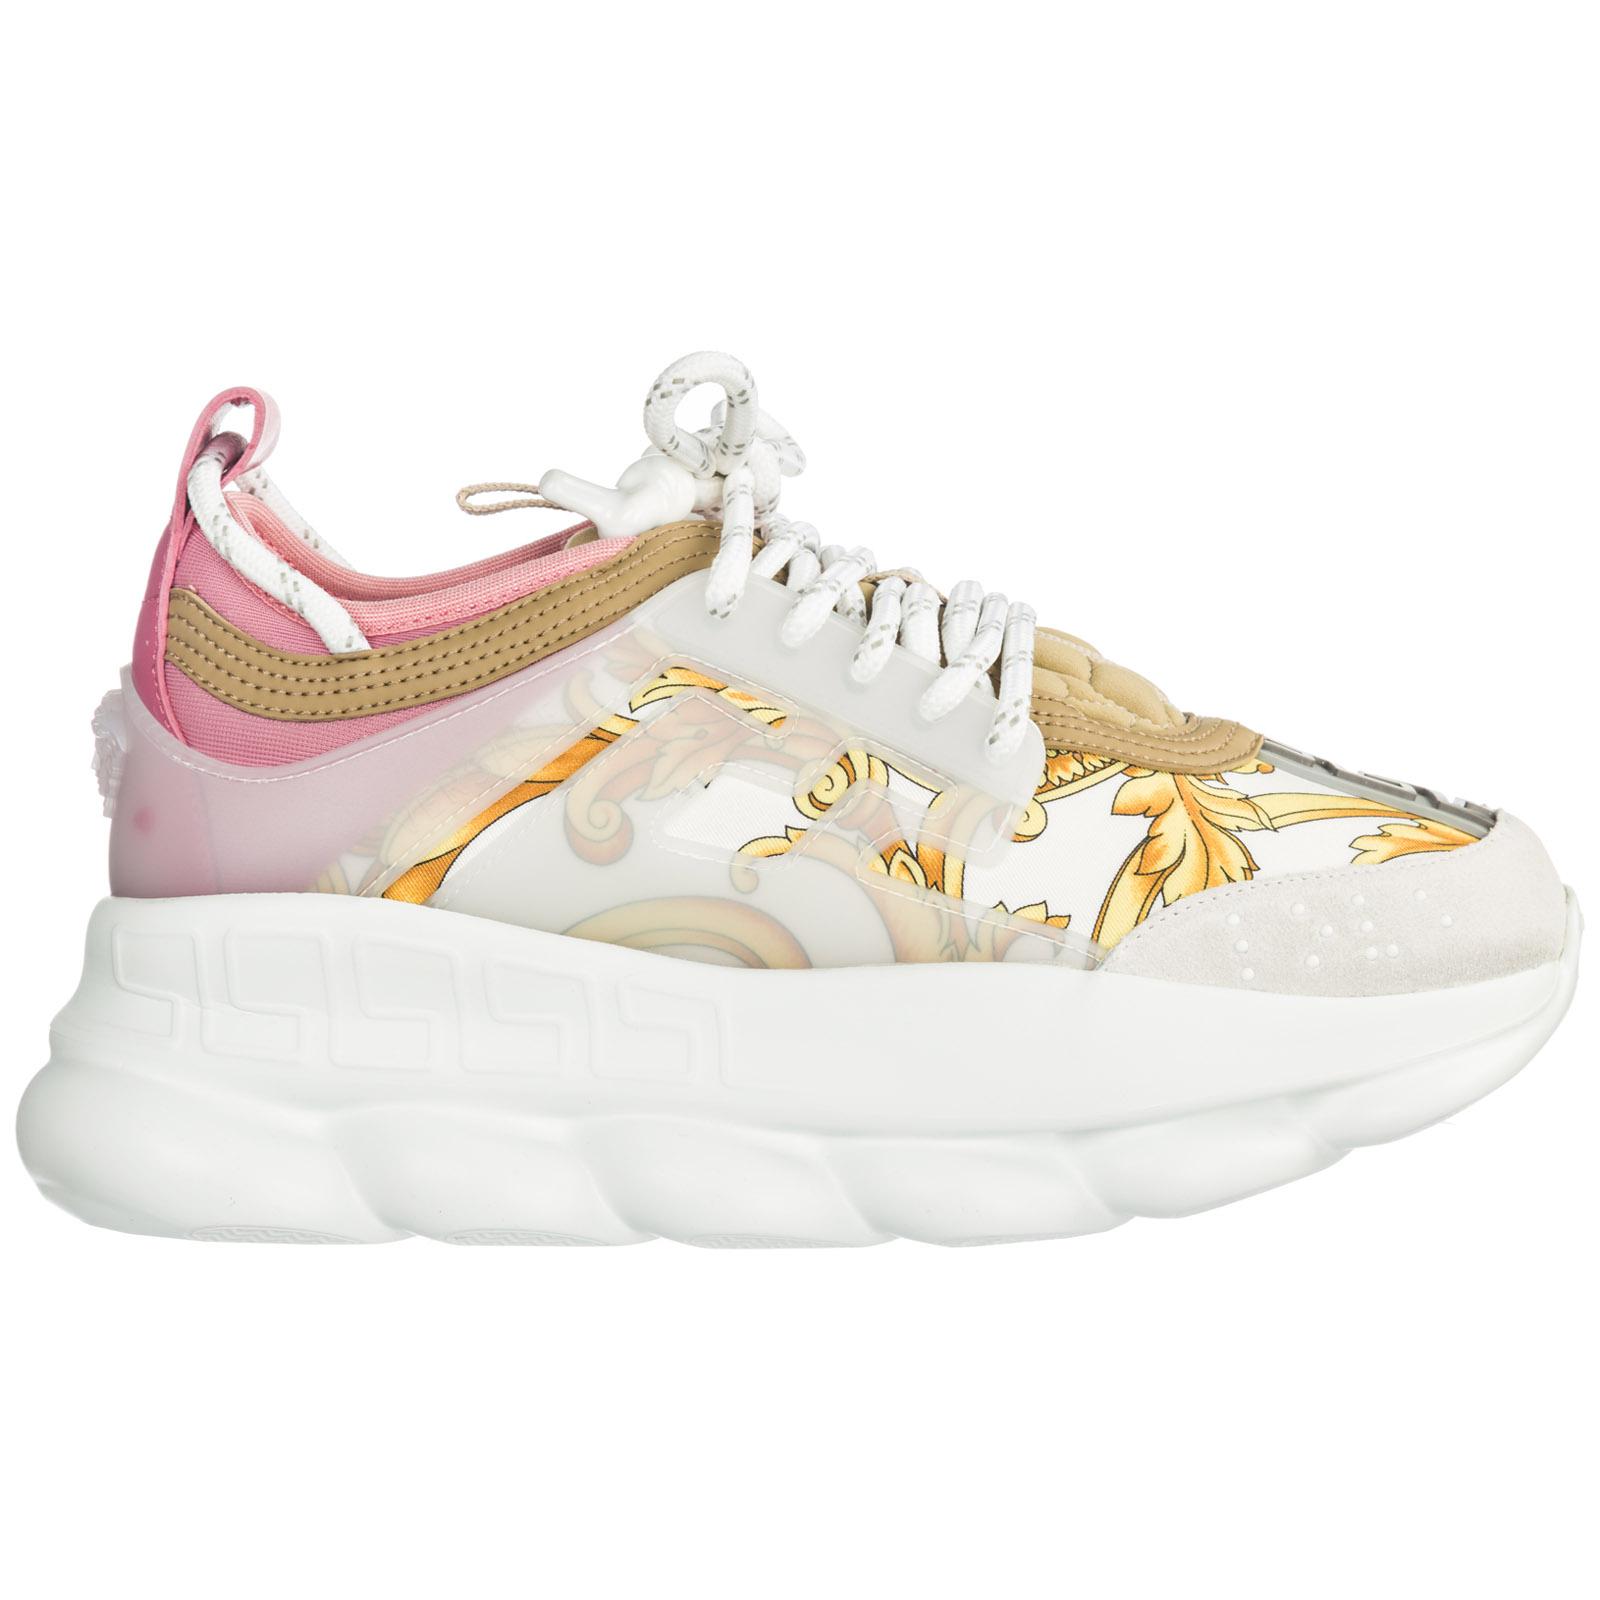 Versace Women's Shoes Trainers Sneakers 